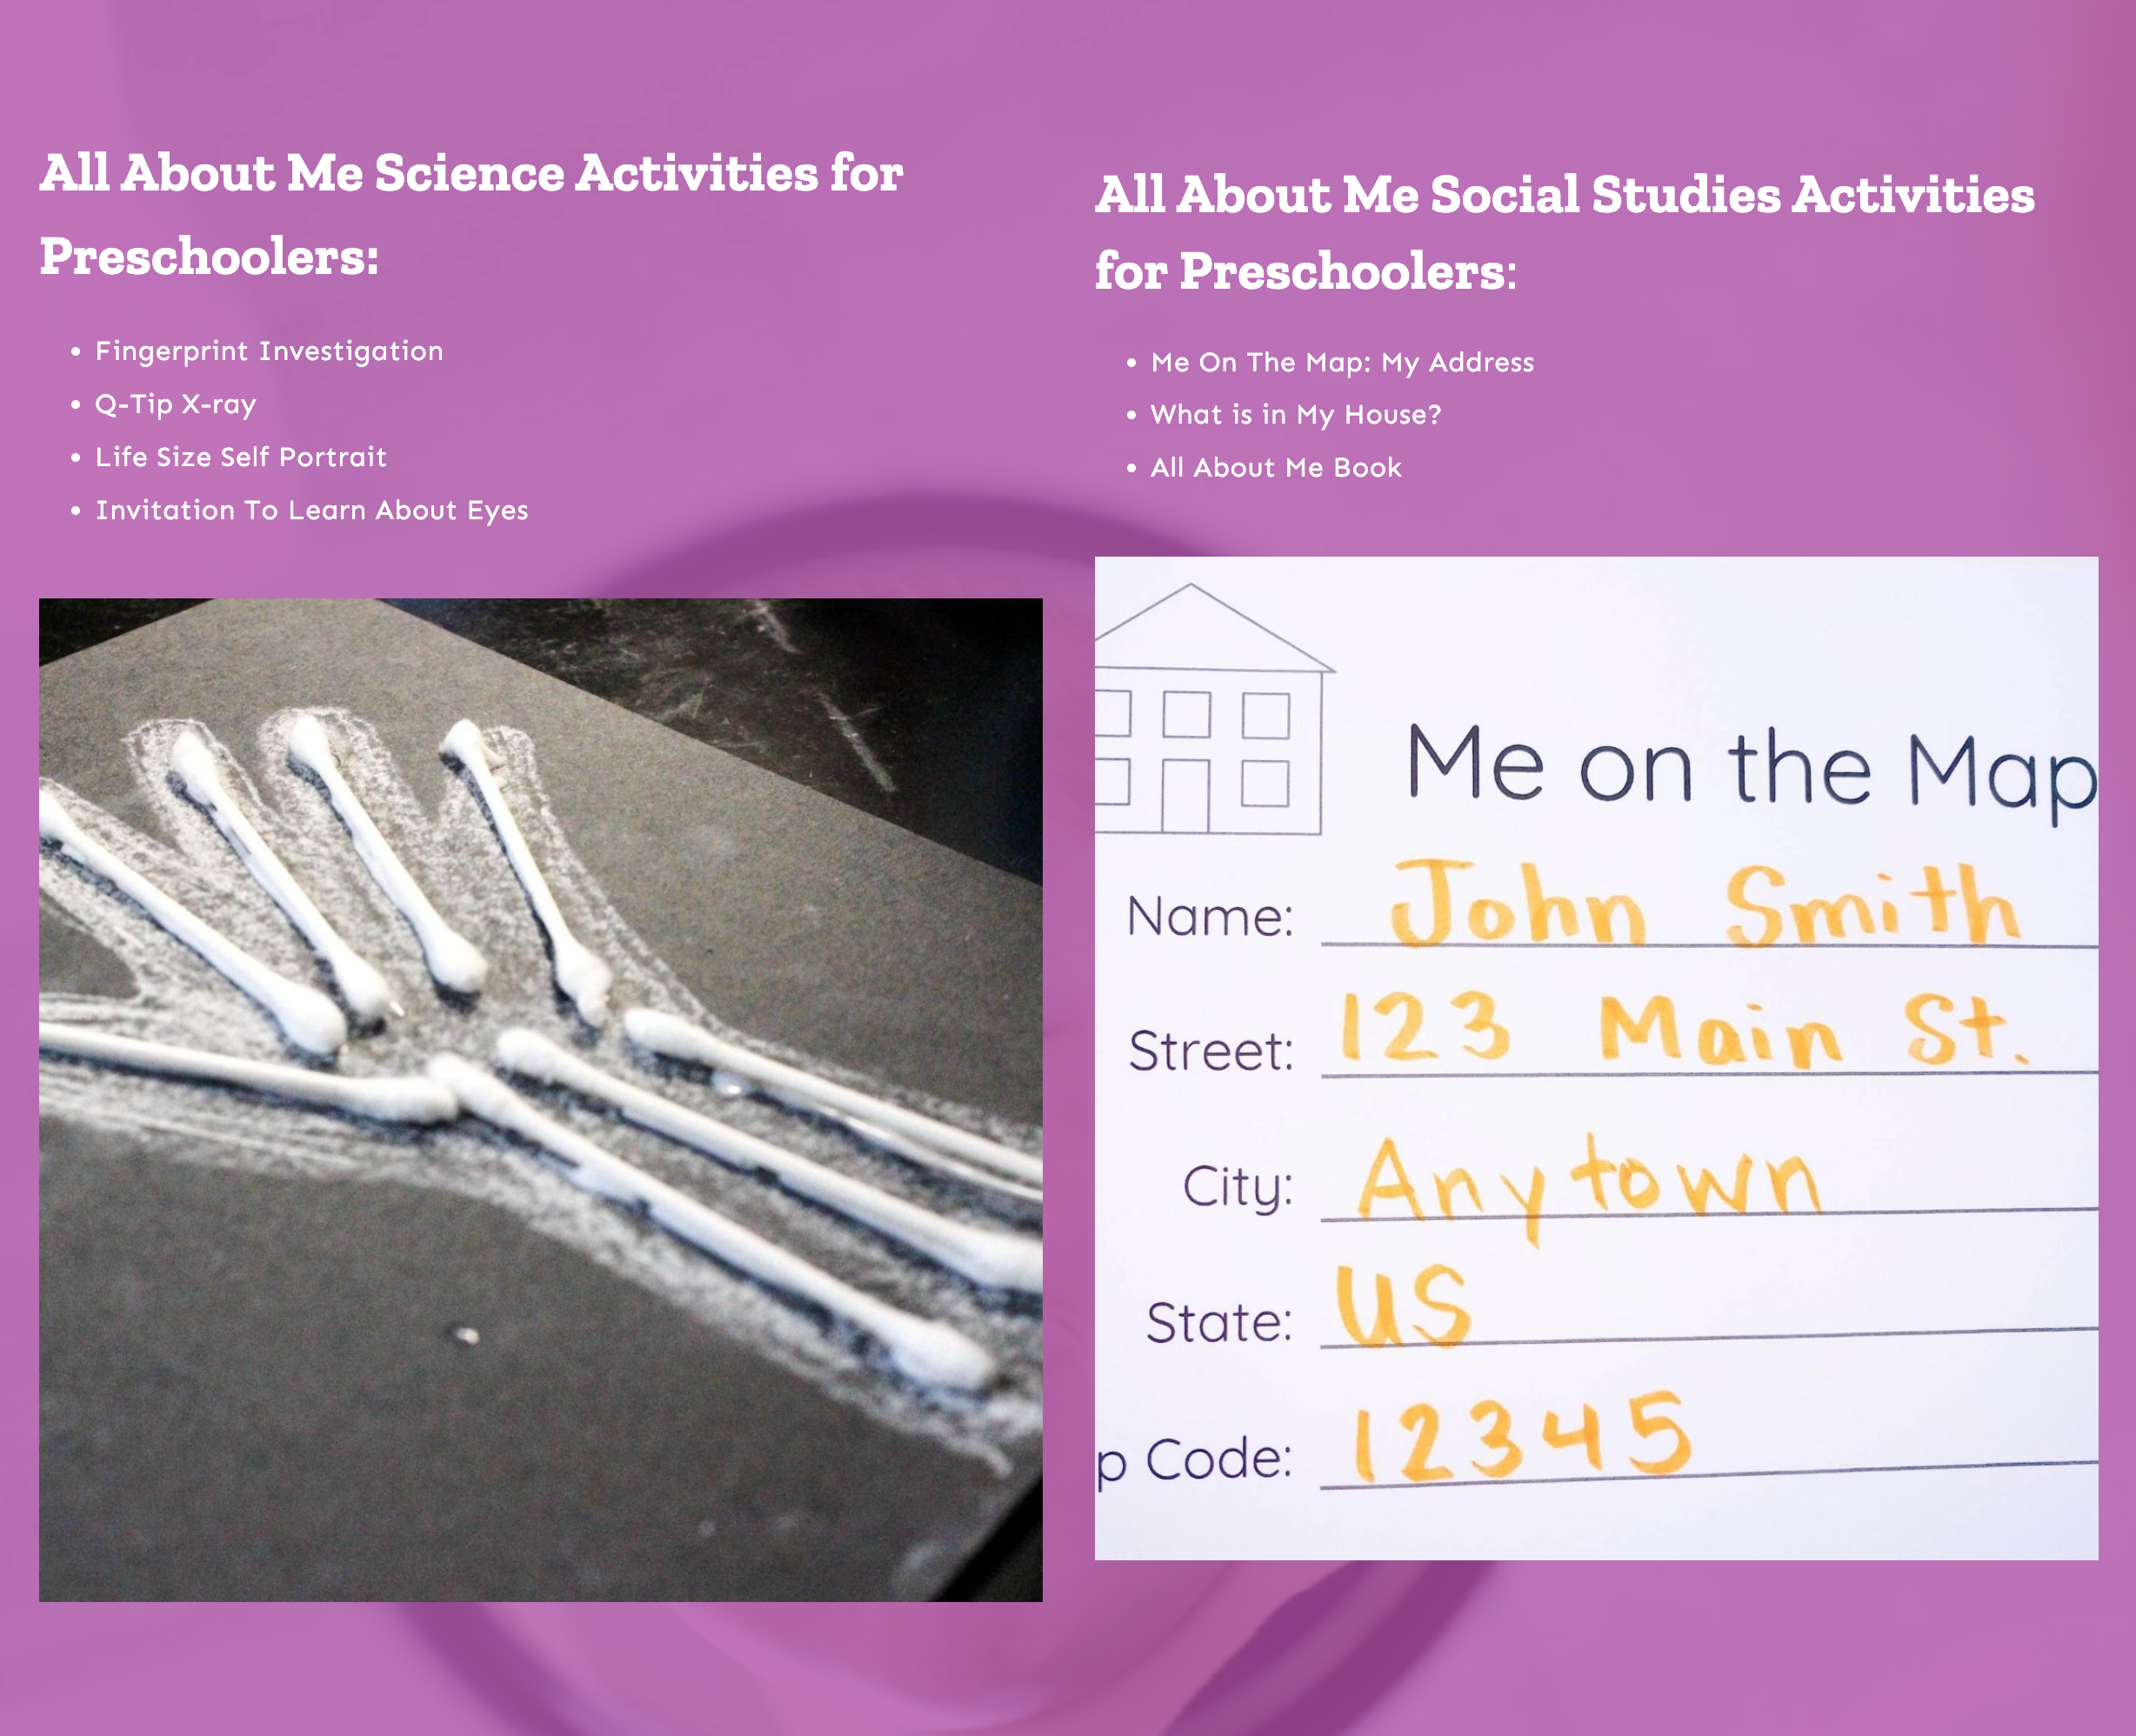 All about me science and social studies activities list